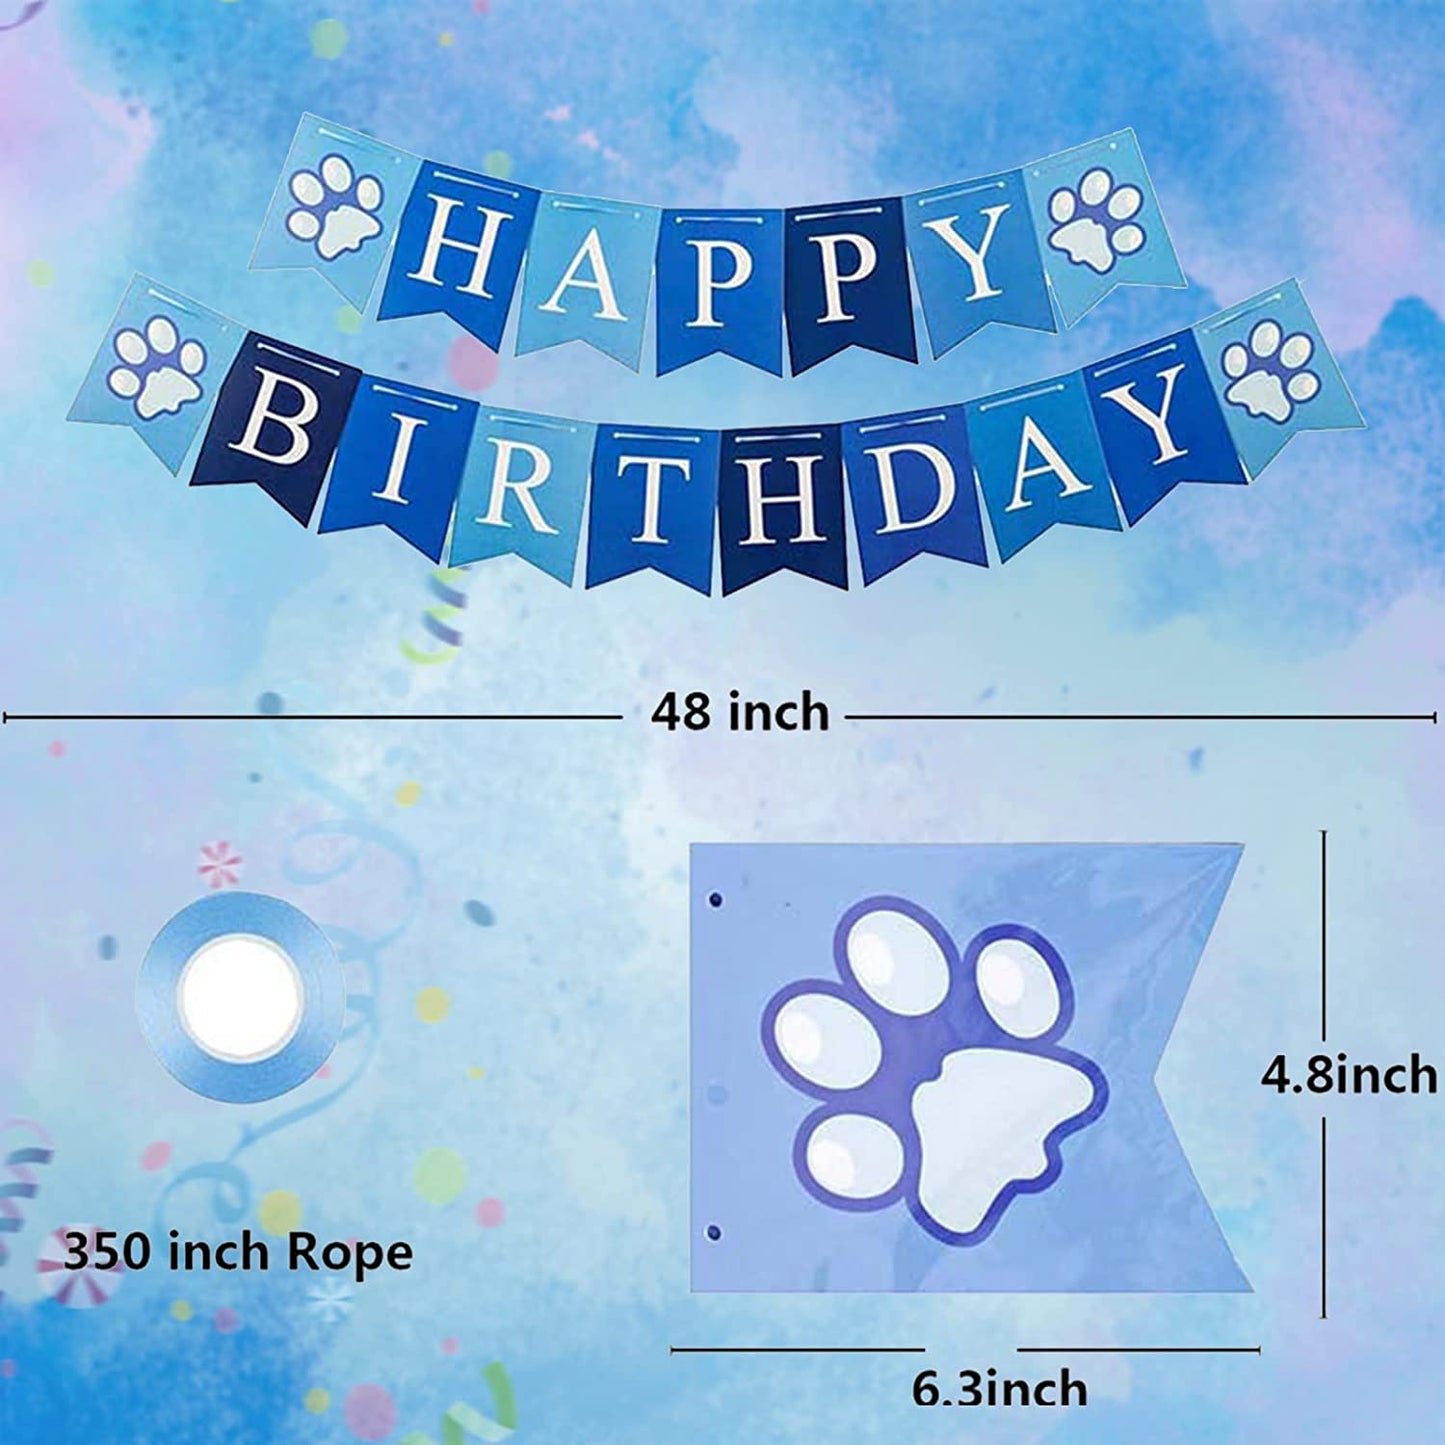 Dog Birthday Party Supplies, Dog Birthday Party Decoration Set, Dog Cute Hat Triangle Scarf Bow Dog Head Banner and Cute Balloon, Used for Dog Birthday Party Decoration (Blue)